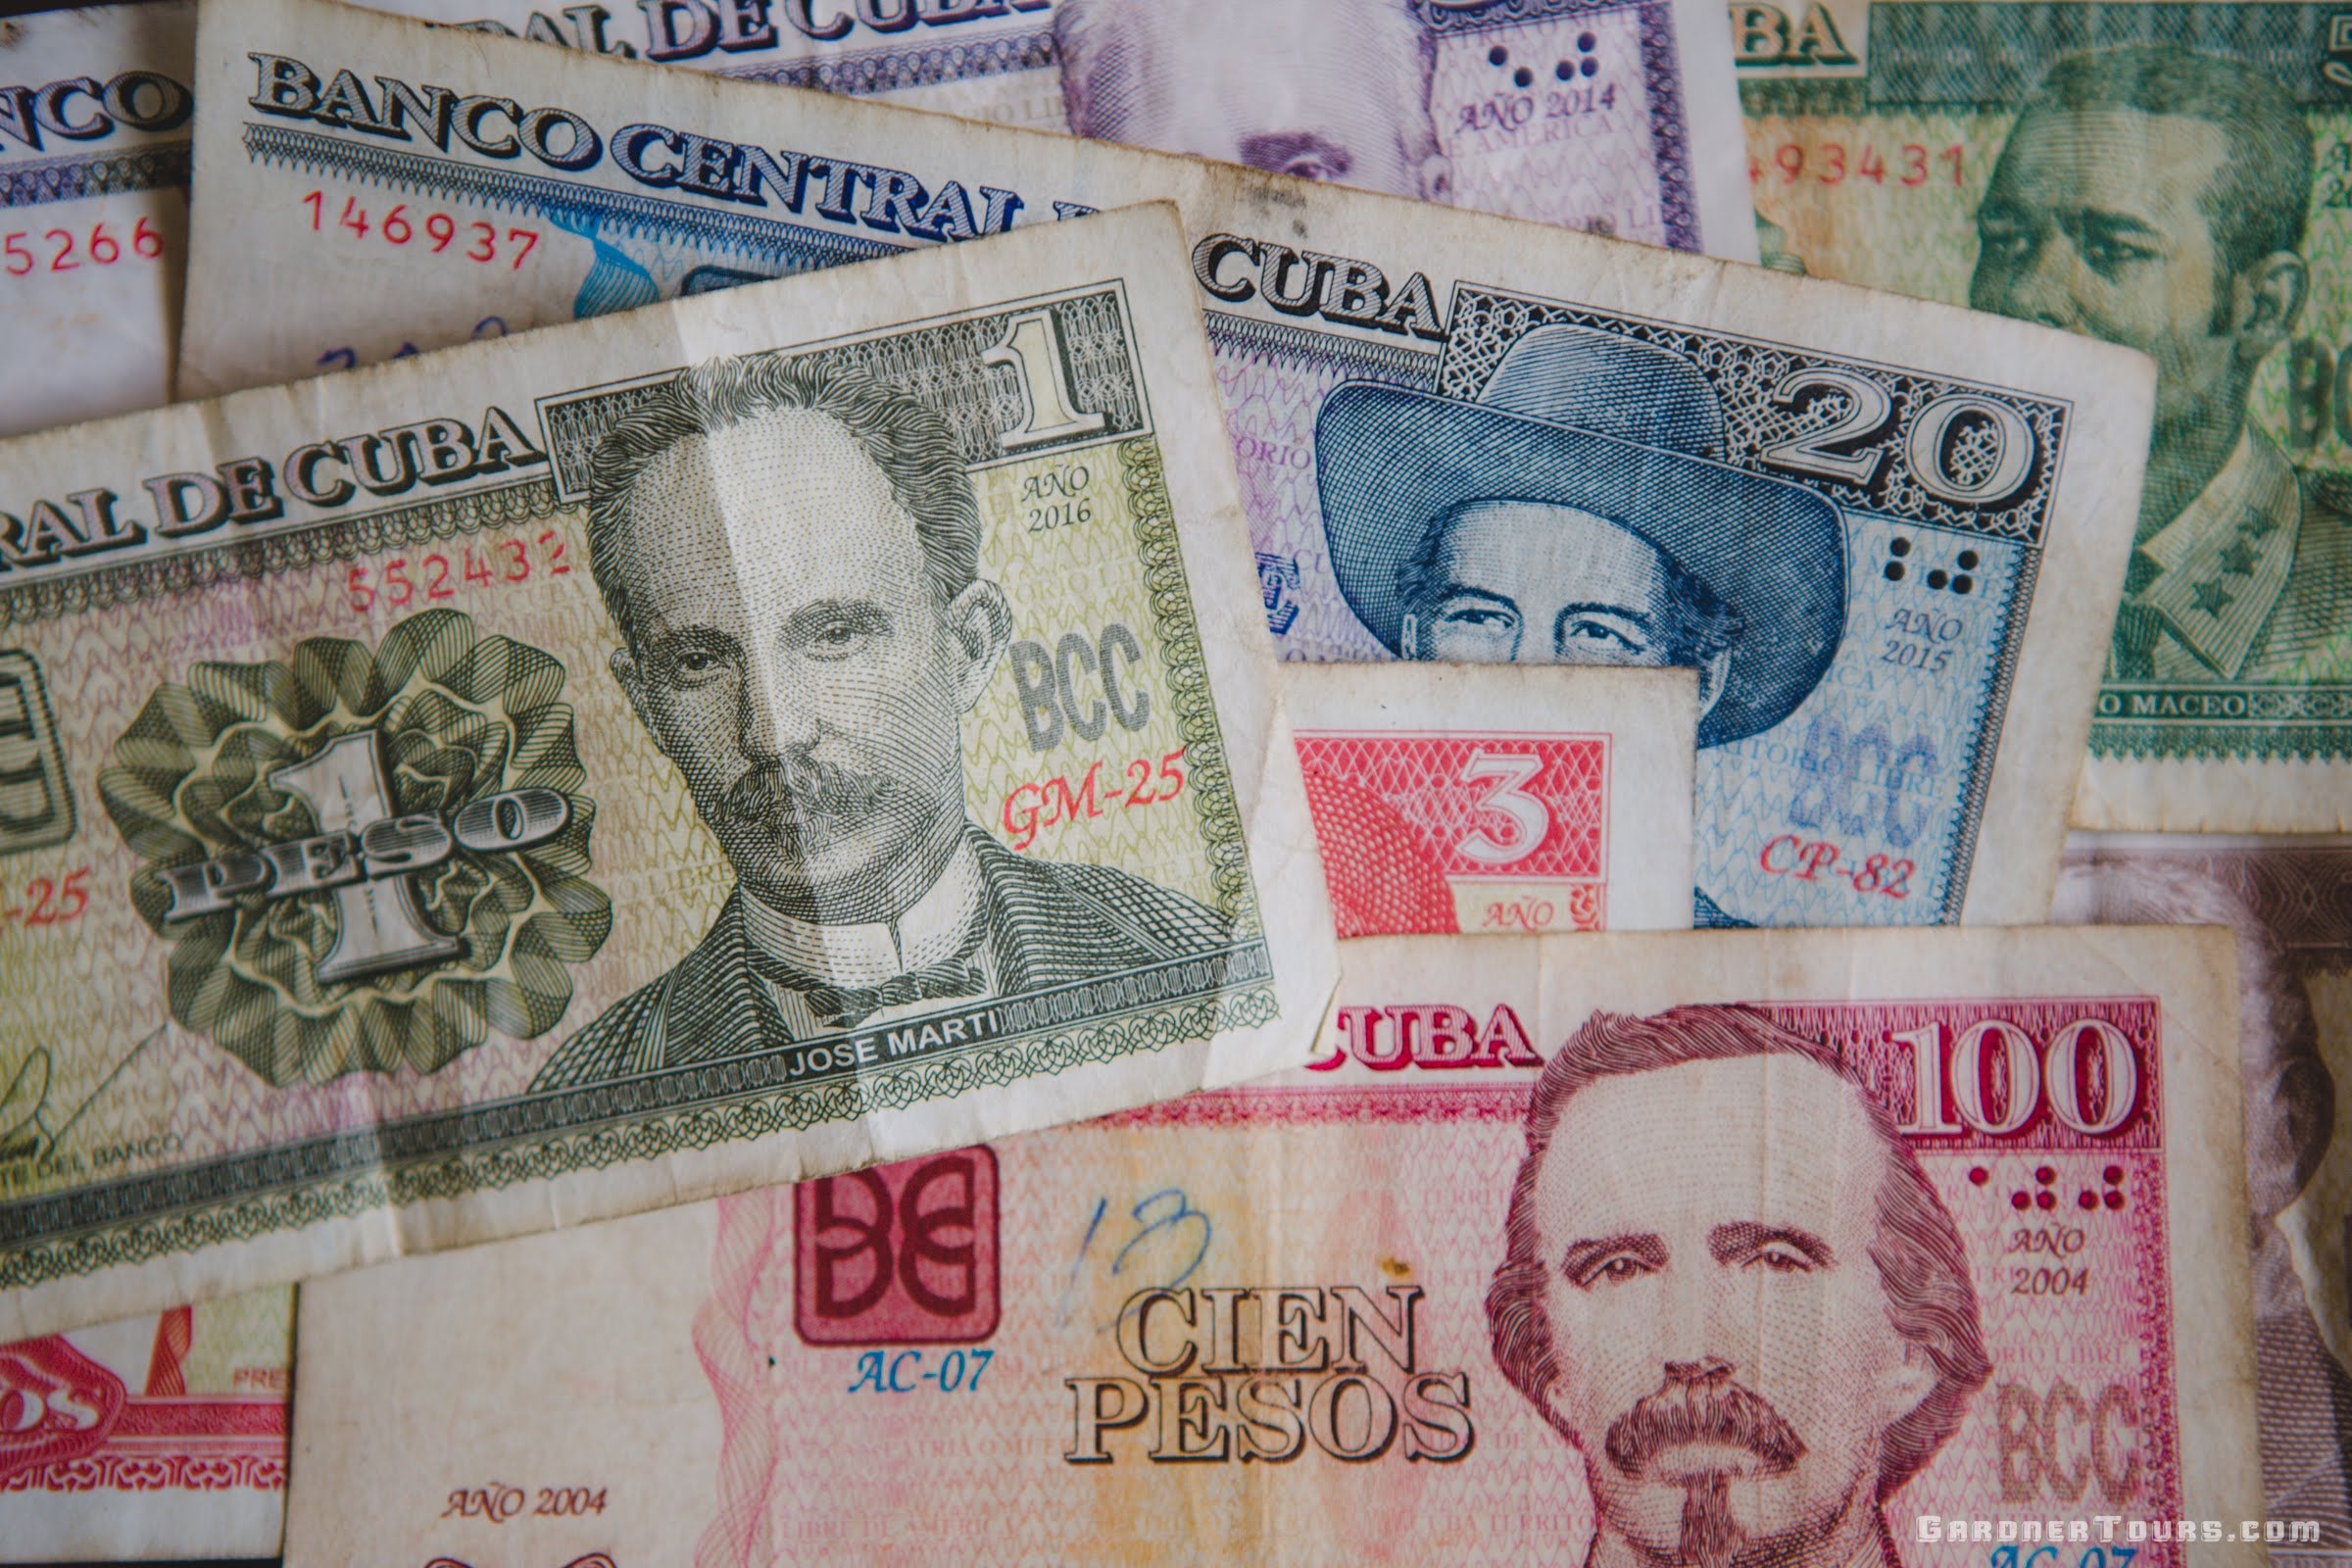 Gardner Tours Luxury Cuba Tours Hospitality Cuban Pesos Laid Out Allowing You to See the Different Bills